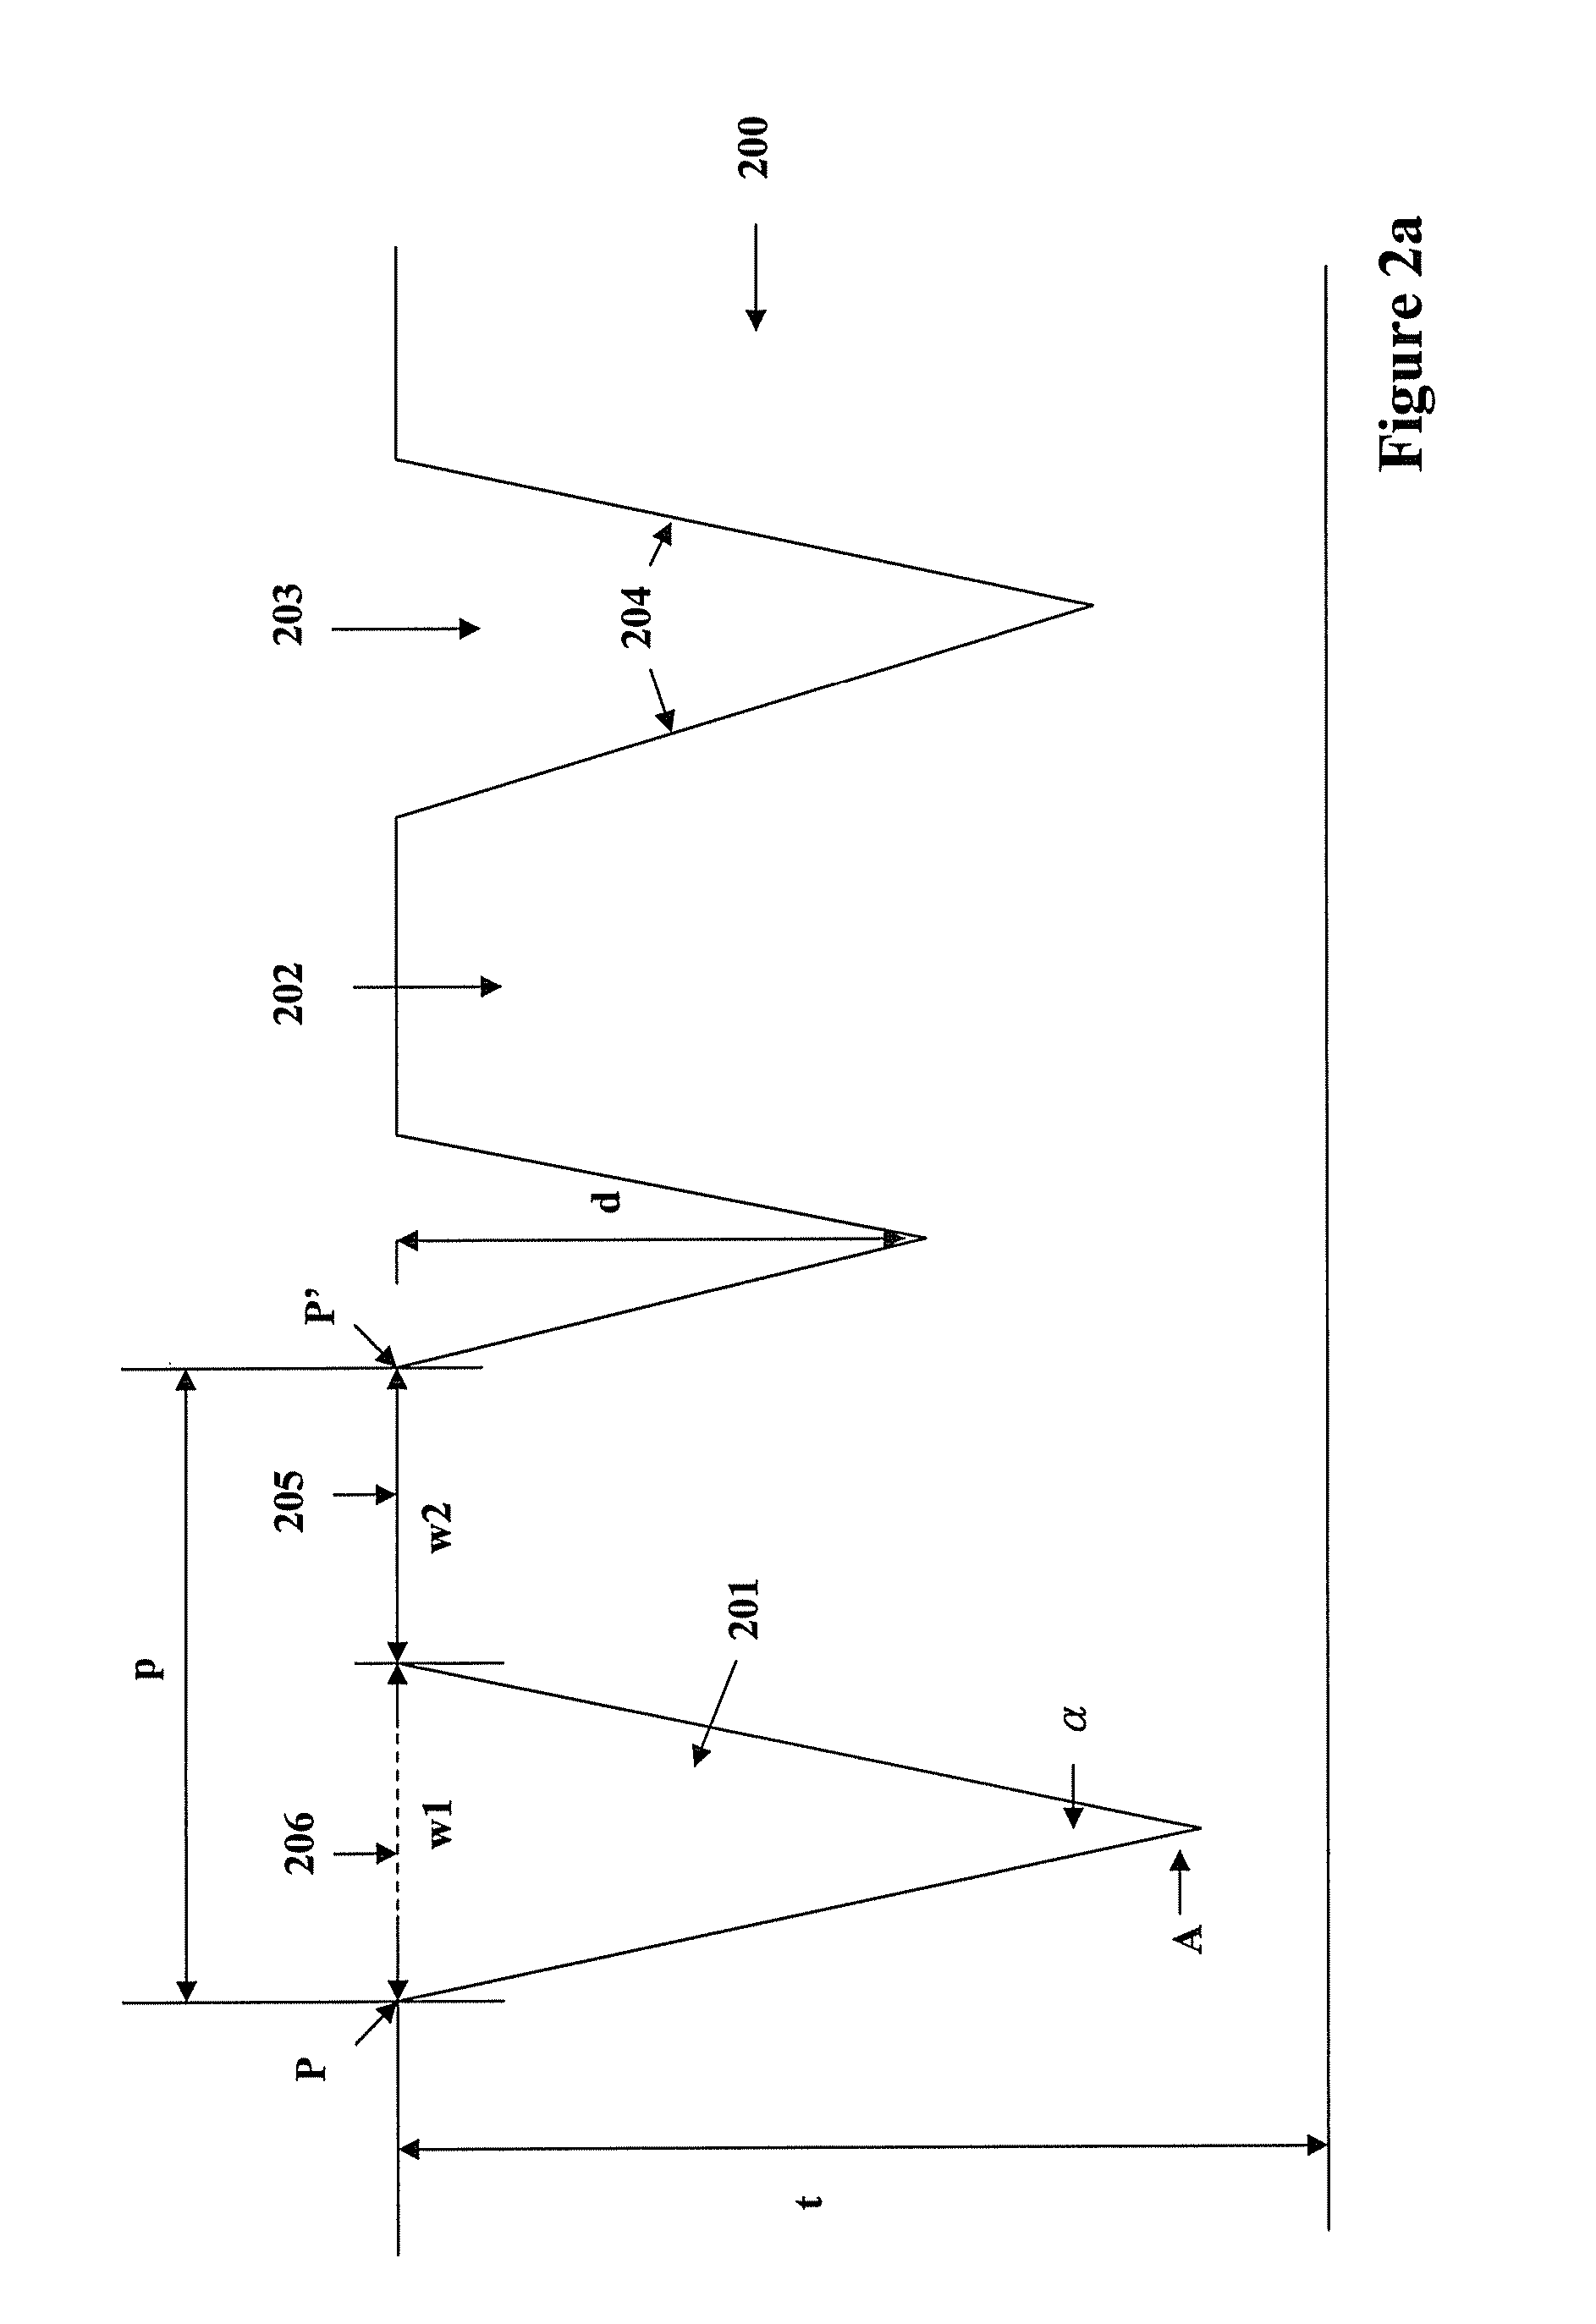 Luminance enhancement structure with varying pitches